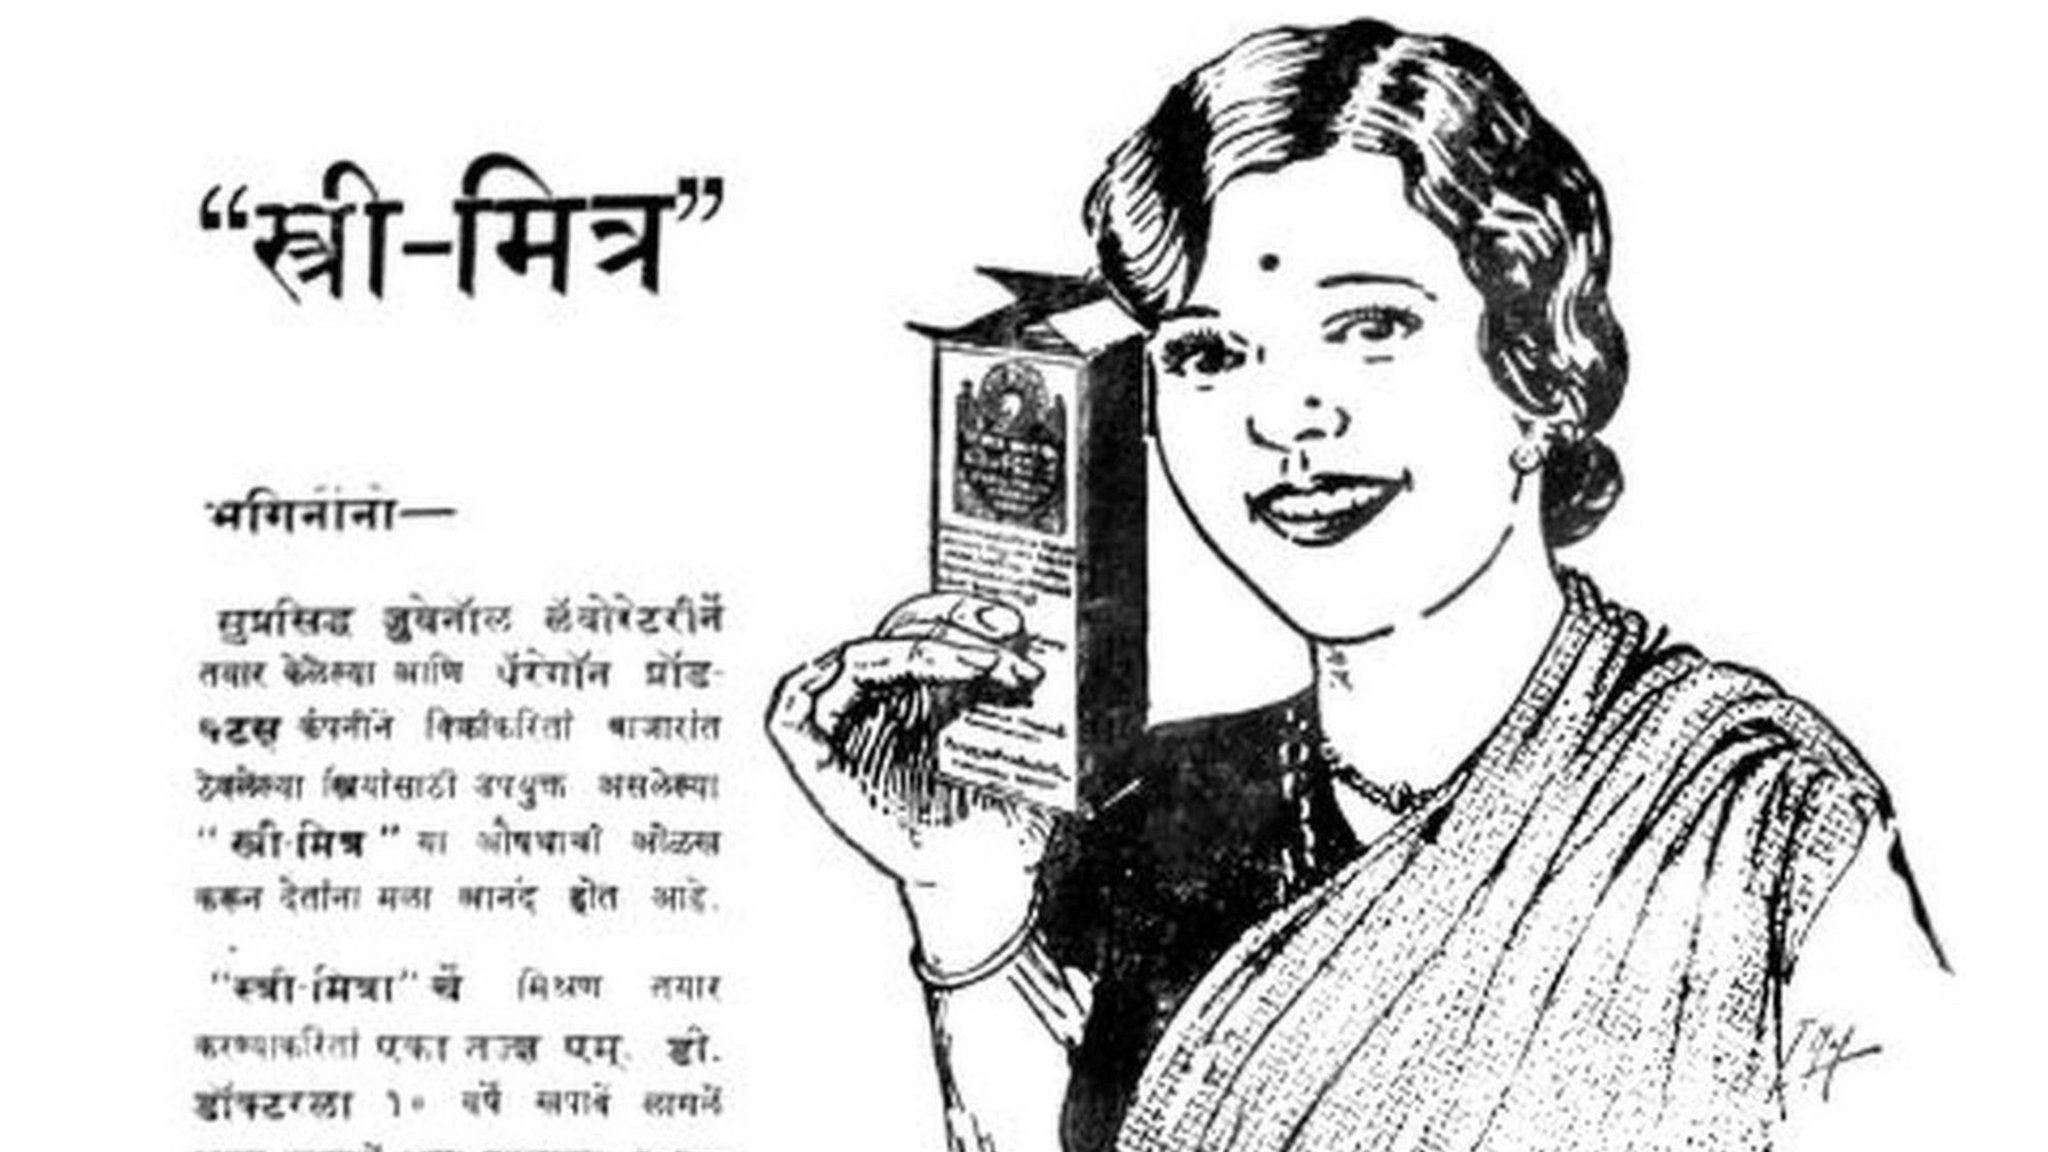 How ads sold soap and pills to women in colonial India